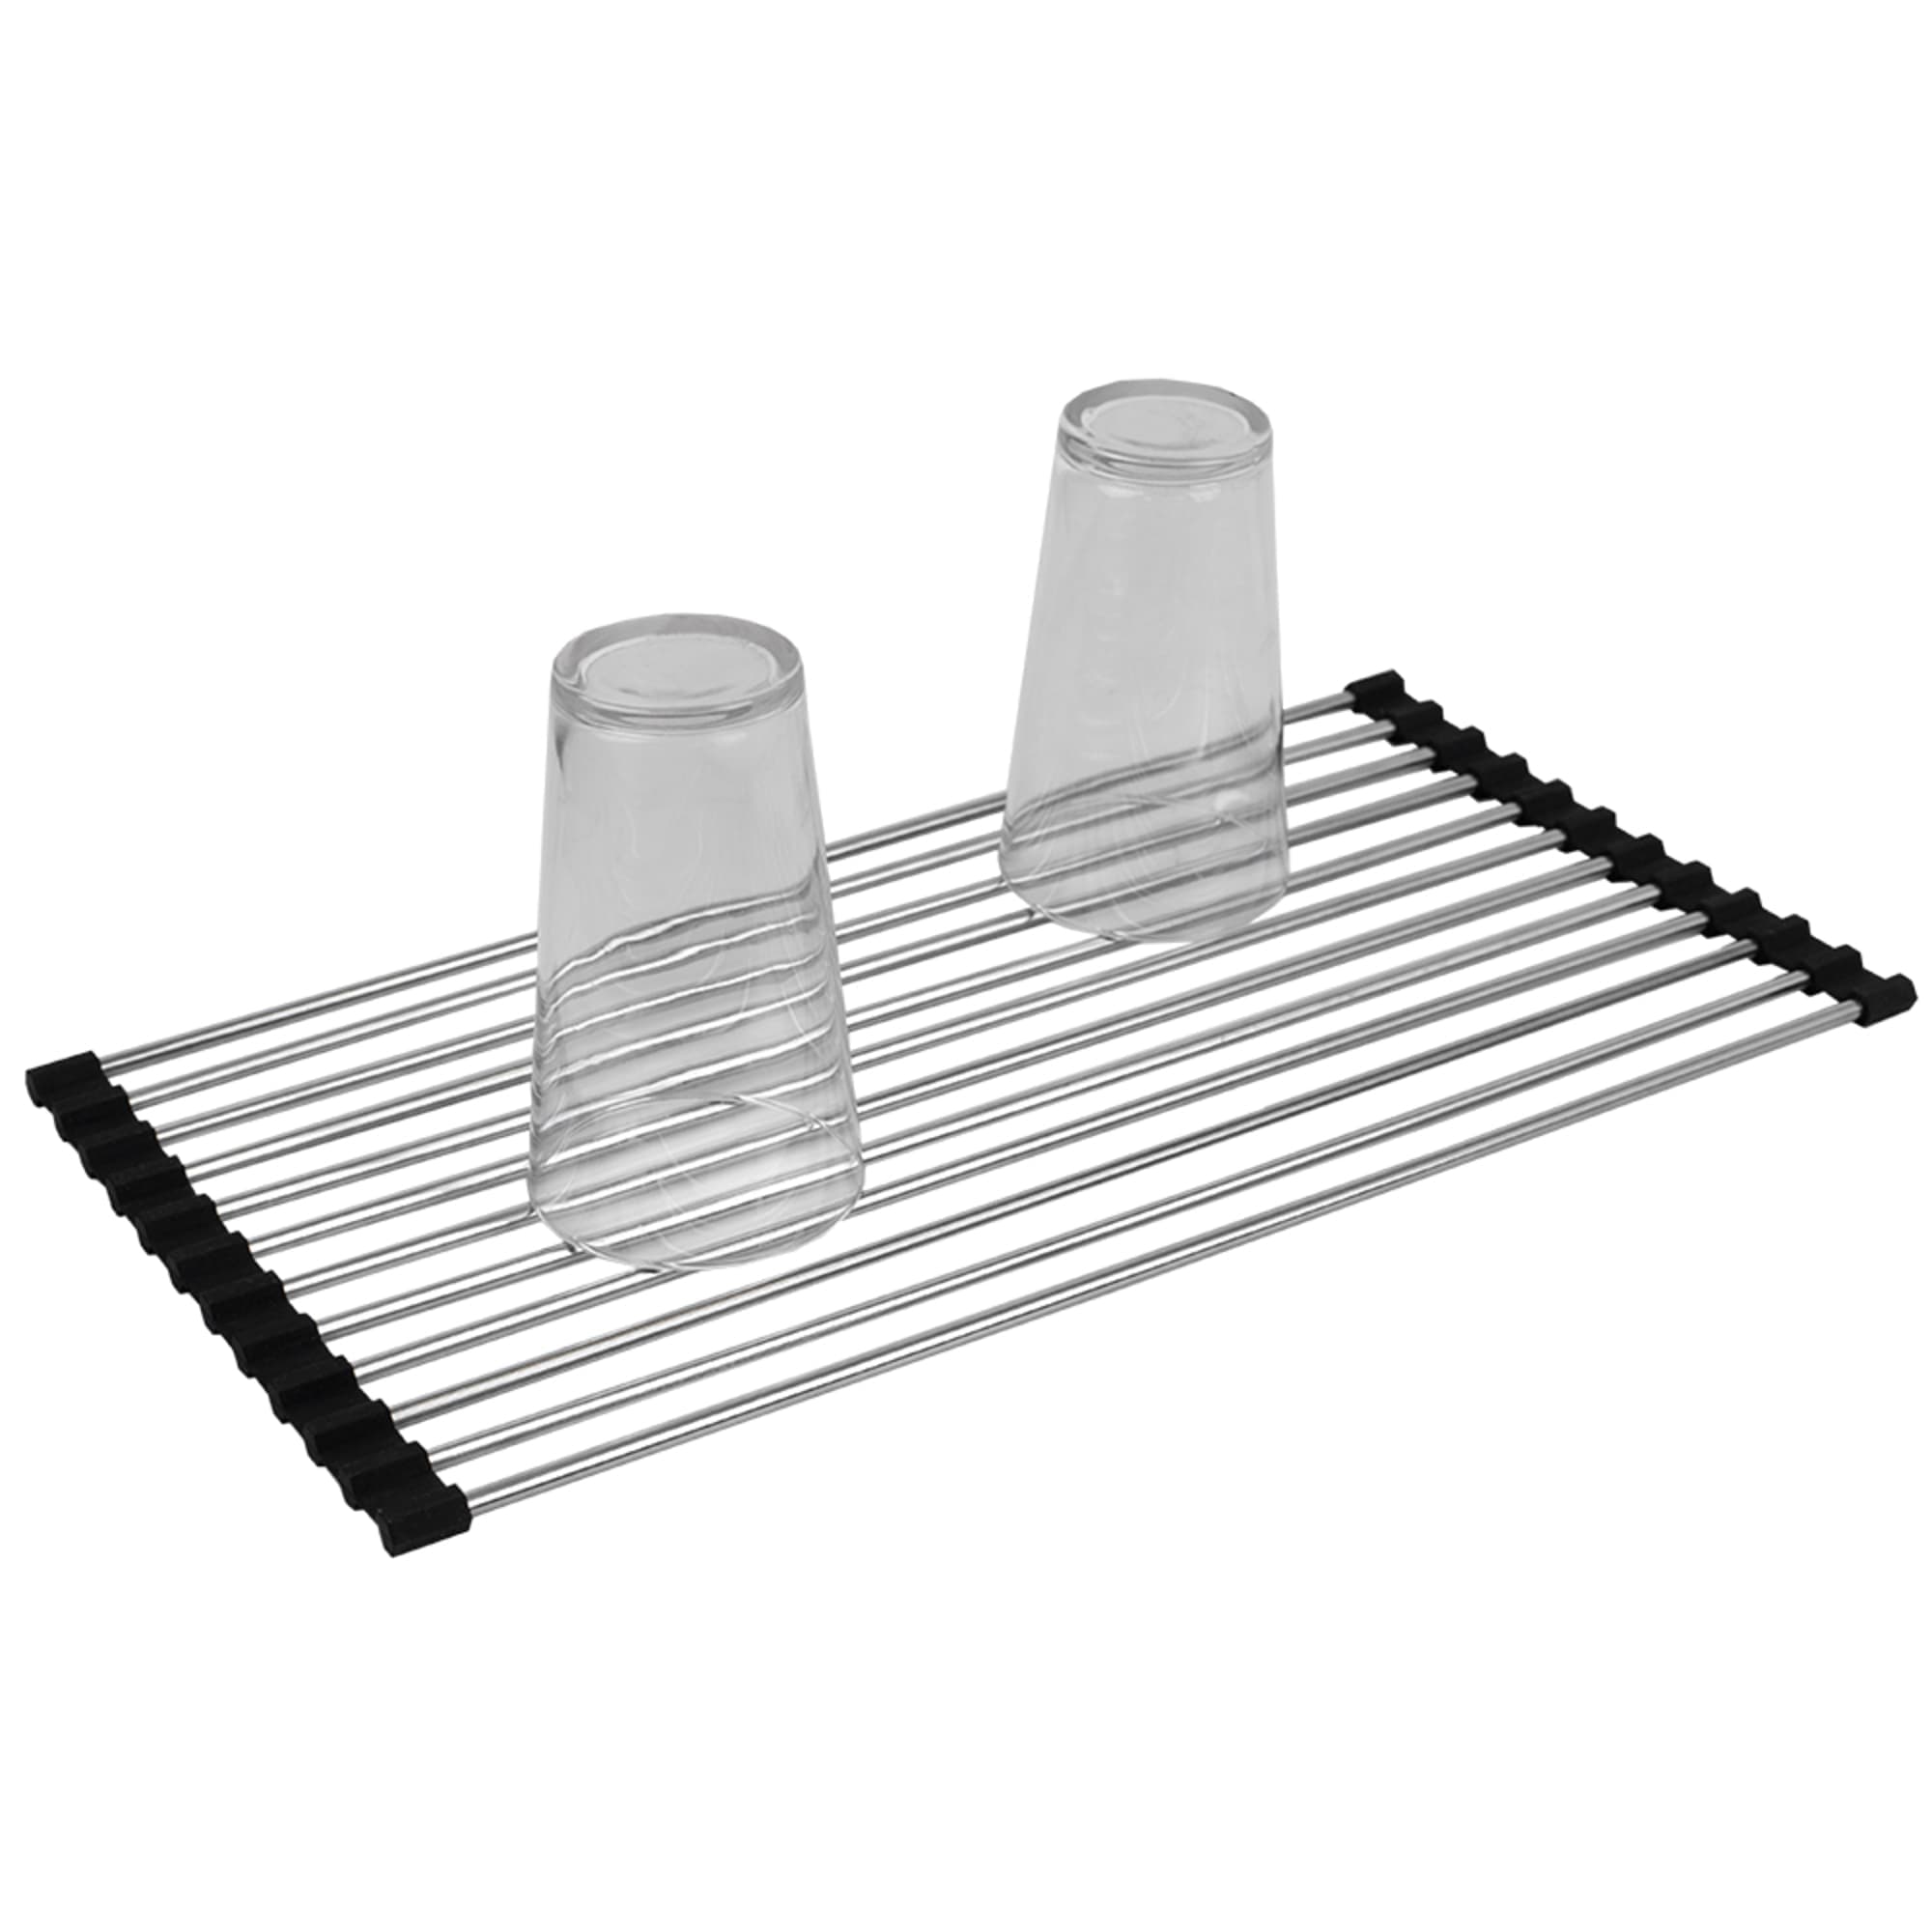 Home Basics Roll Up Dish Drying Rack, Black $8.00 EACH, CASE PACK OF 12